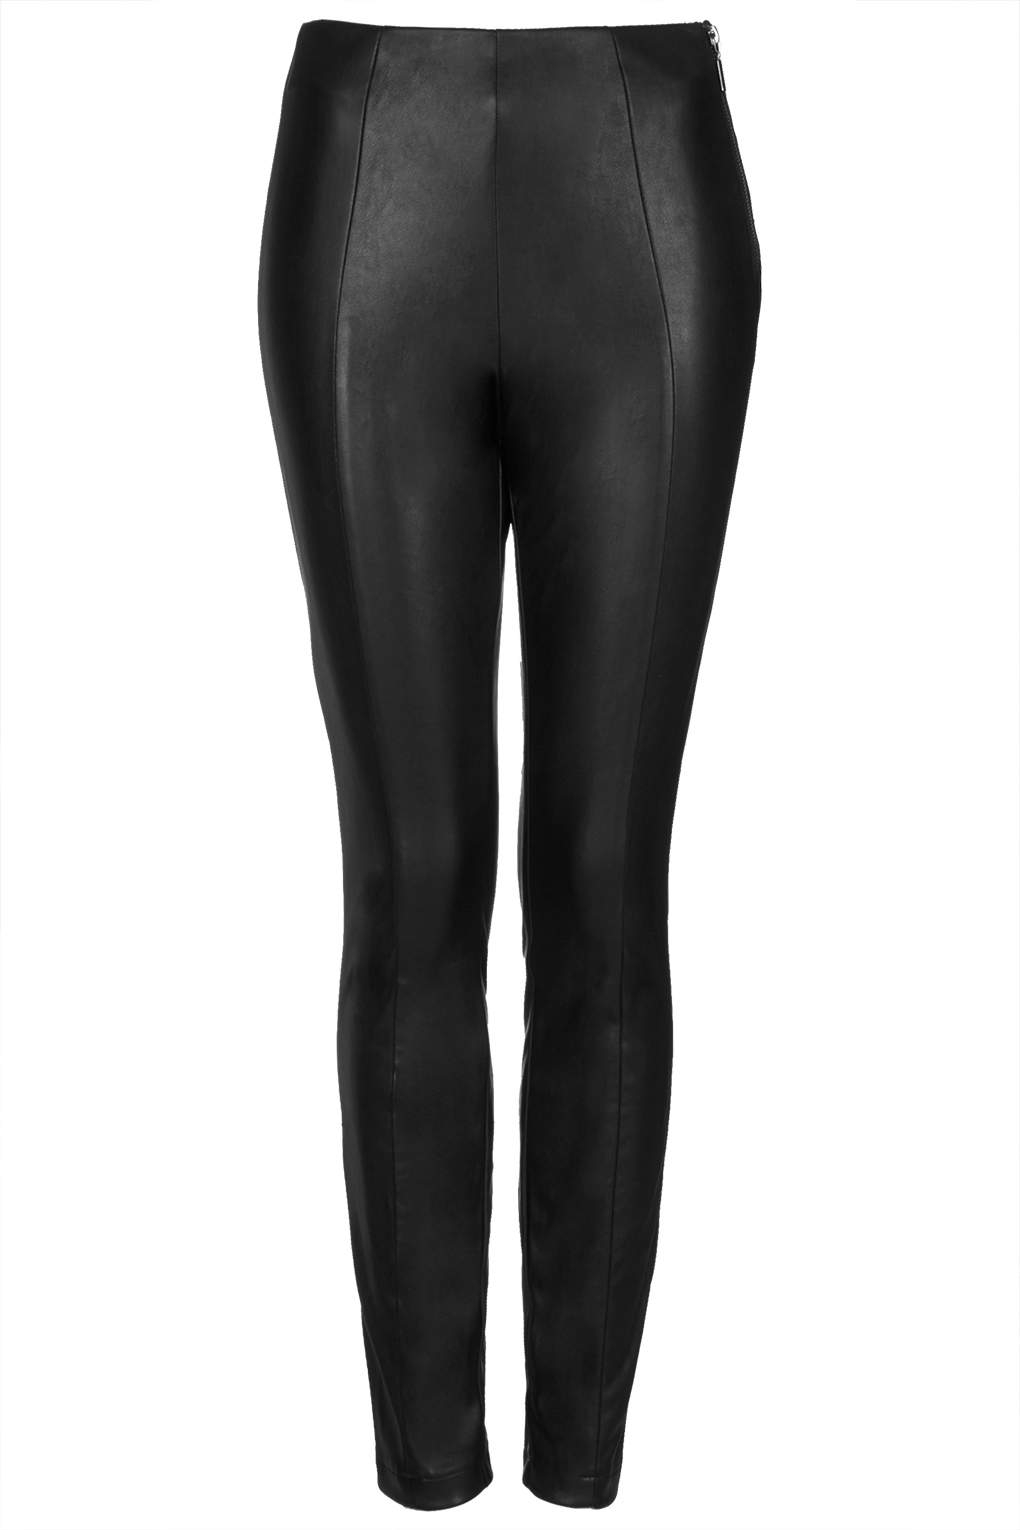 Lyst - Topshop Super Soft Leather Look Skinny Trousers in Black